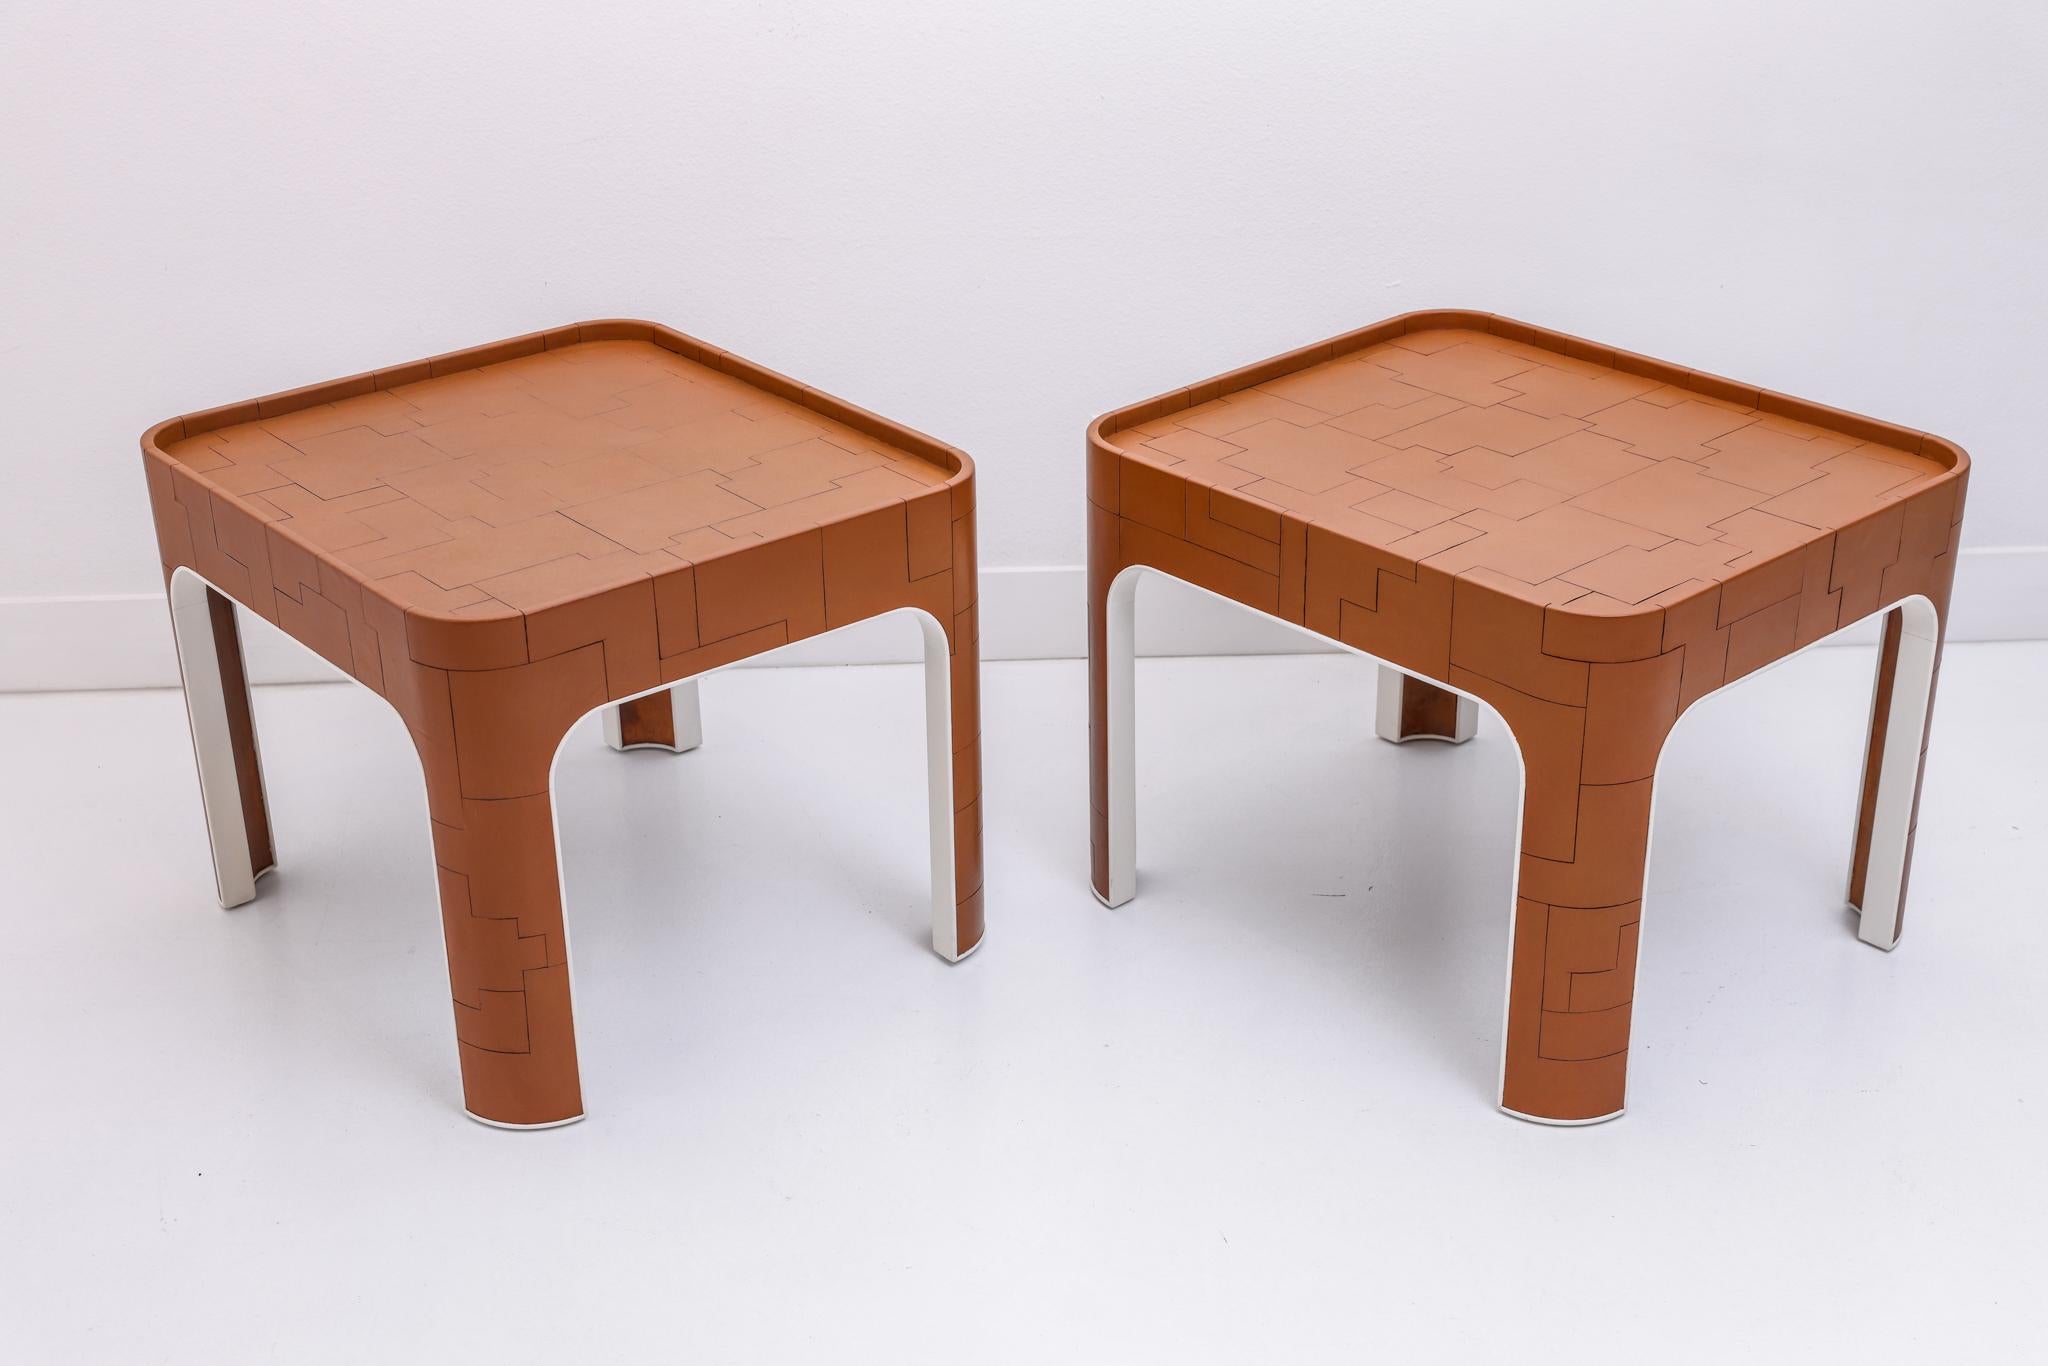 This pair of side tables were designed by John Dickinson and were put into production by San Francisco based furniture makers Randolf & Hein. Exhibiting all the hallmarks of Dickinson, the interior side of the legs are white lacquered. The top and